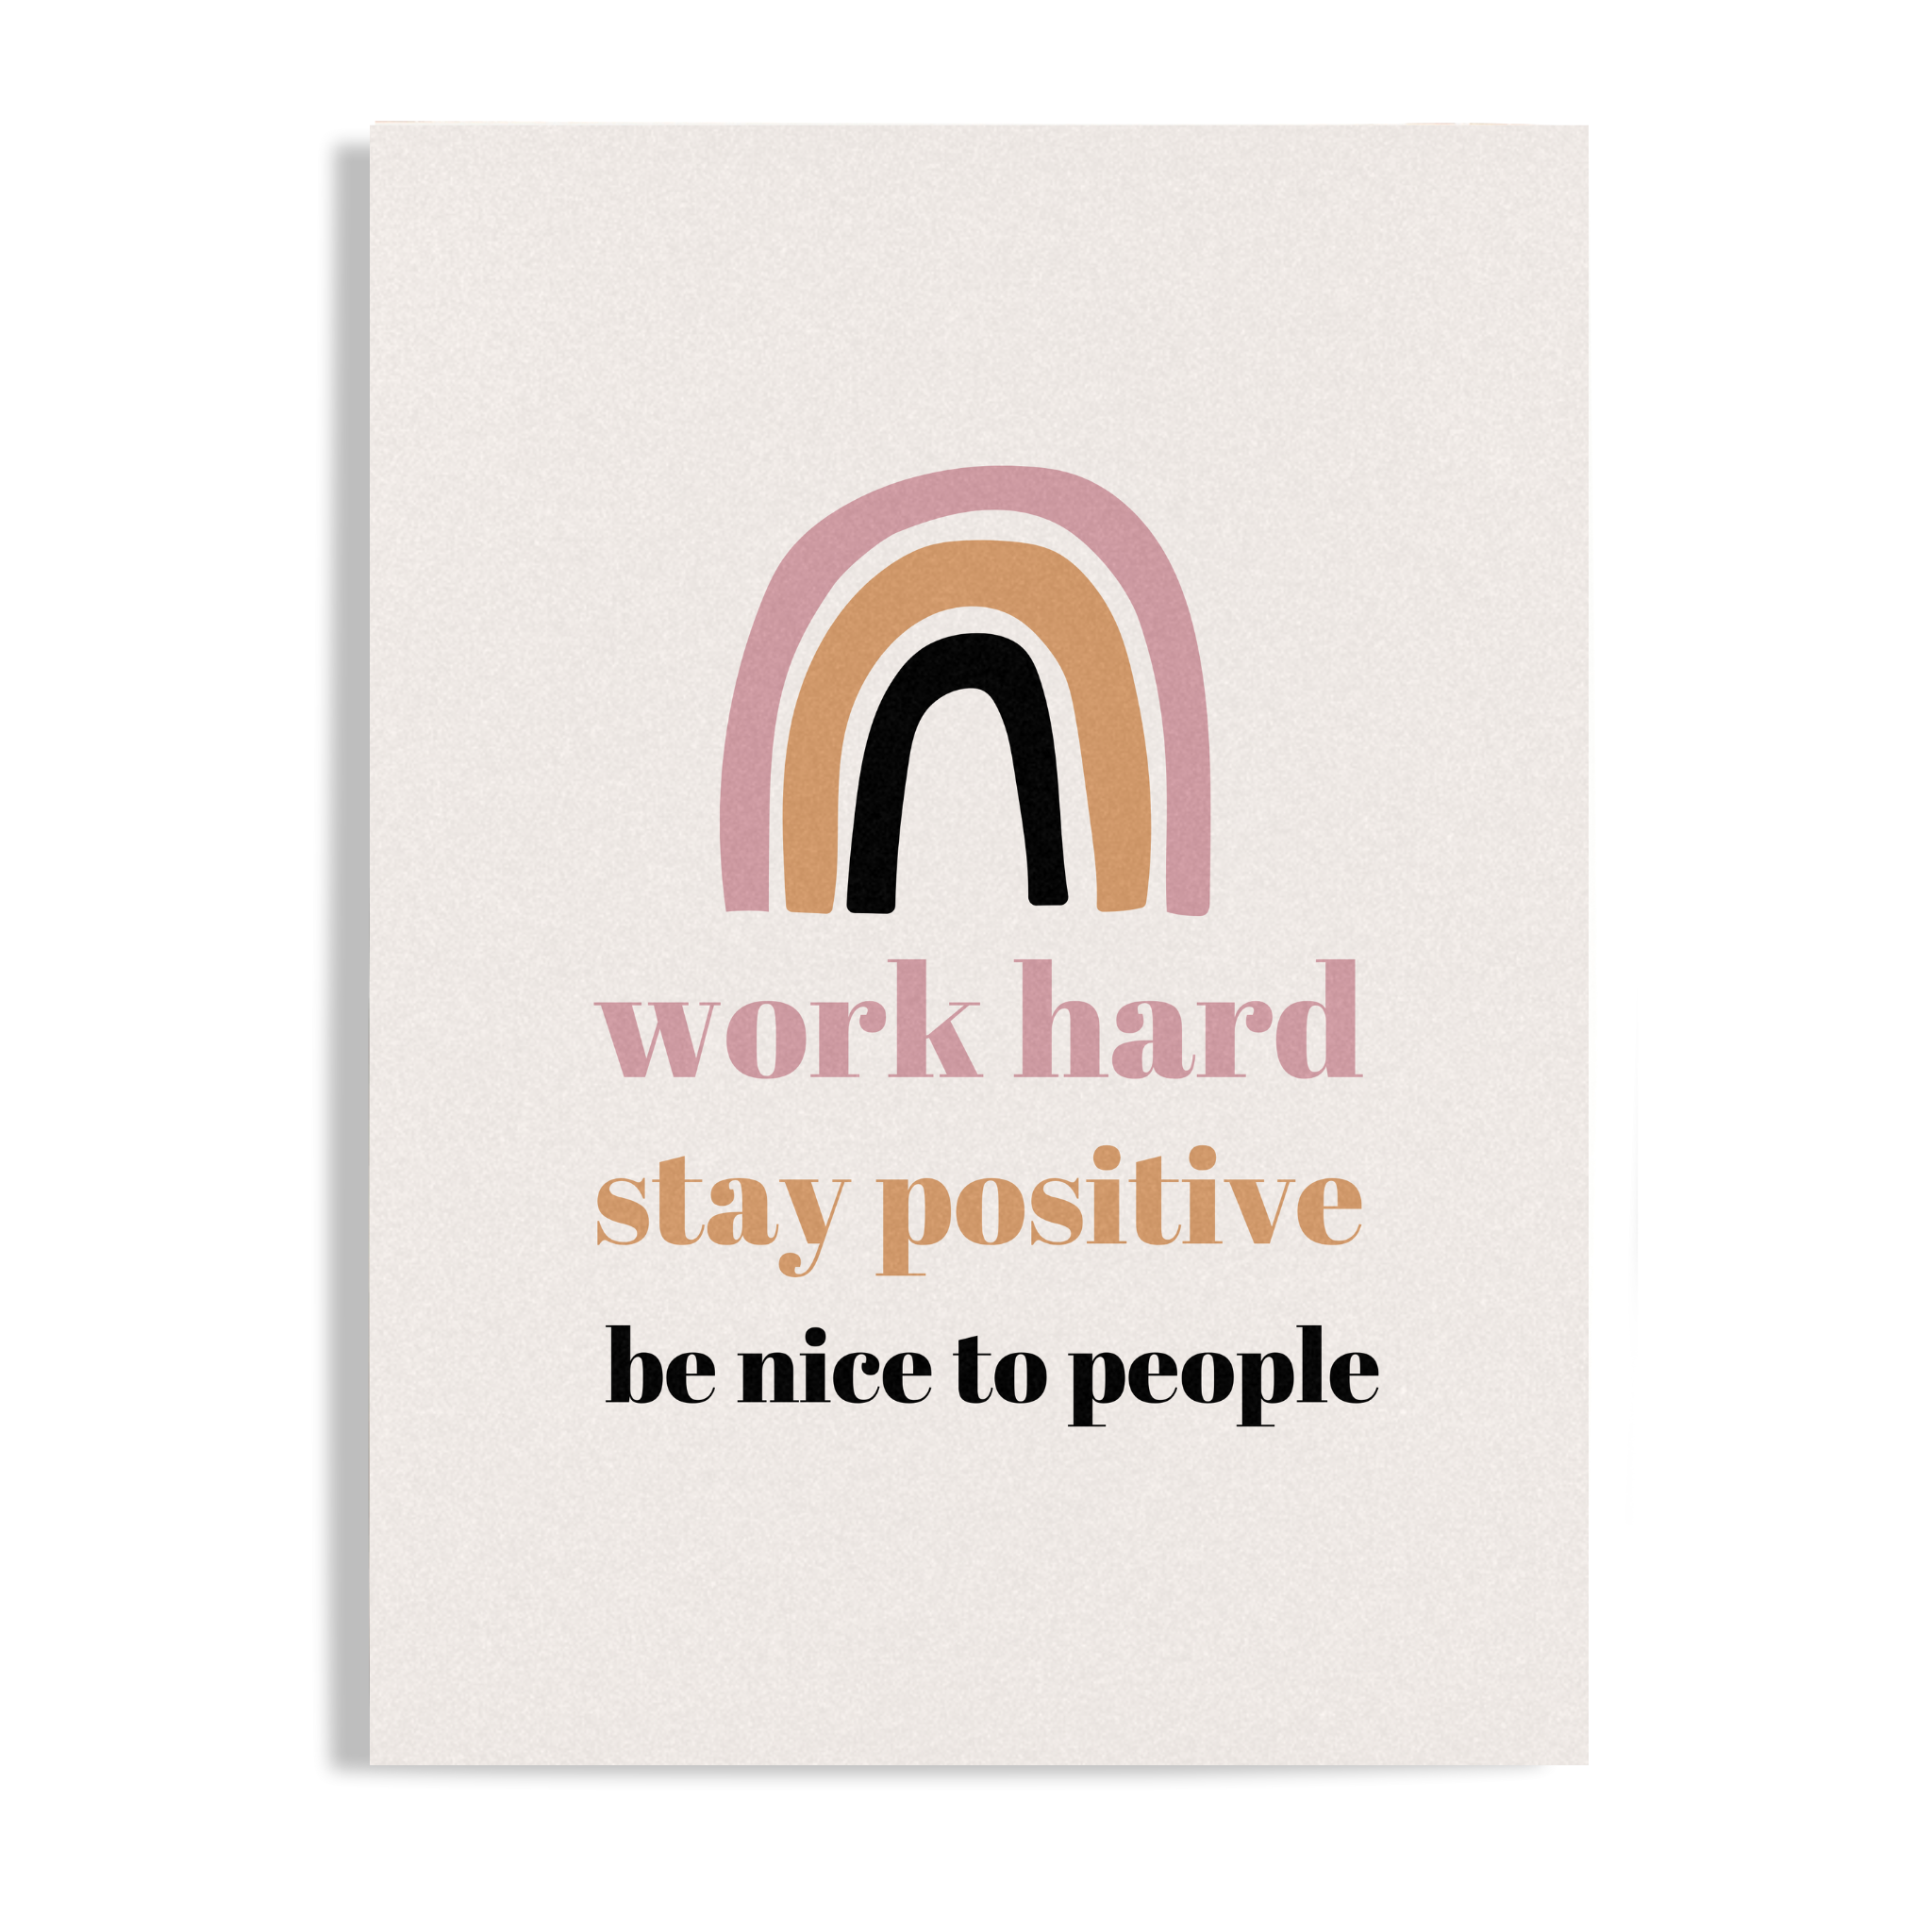 work hard and be kind poster